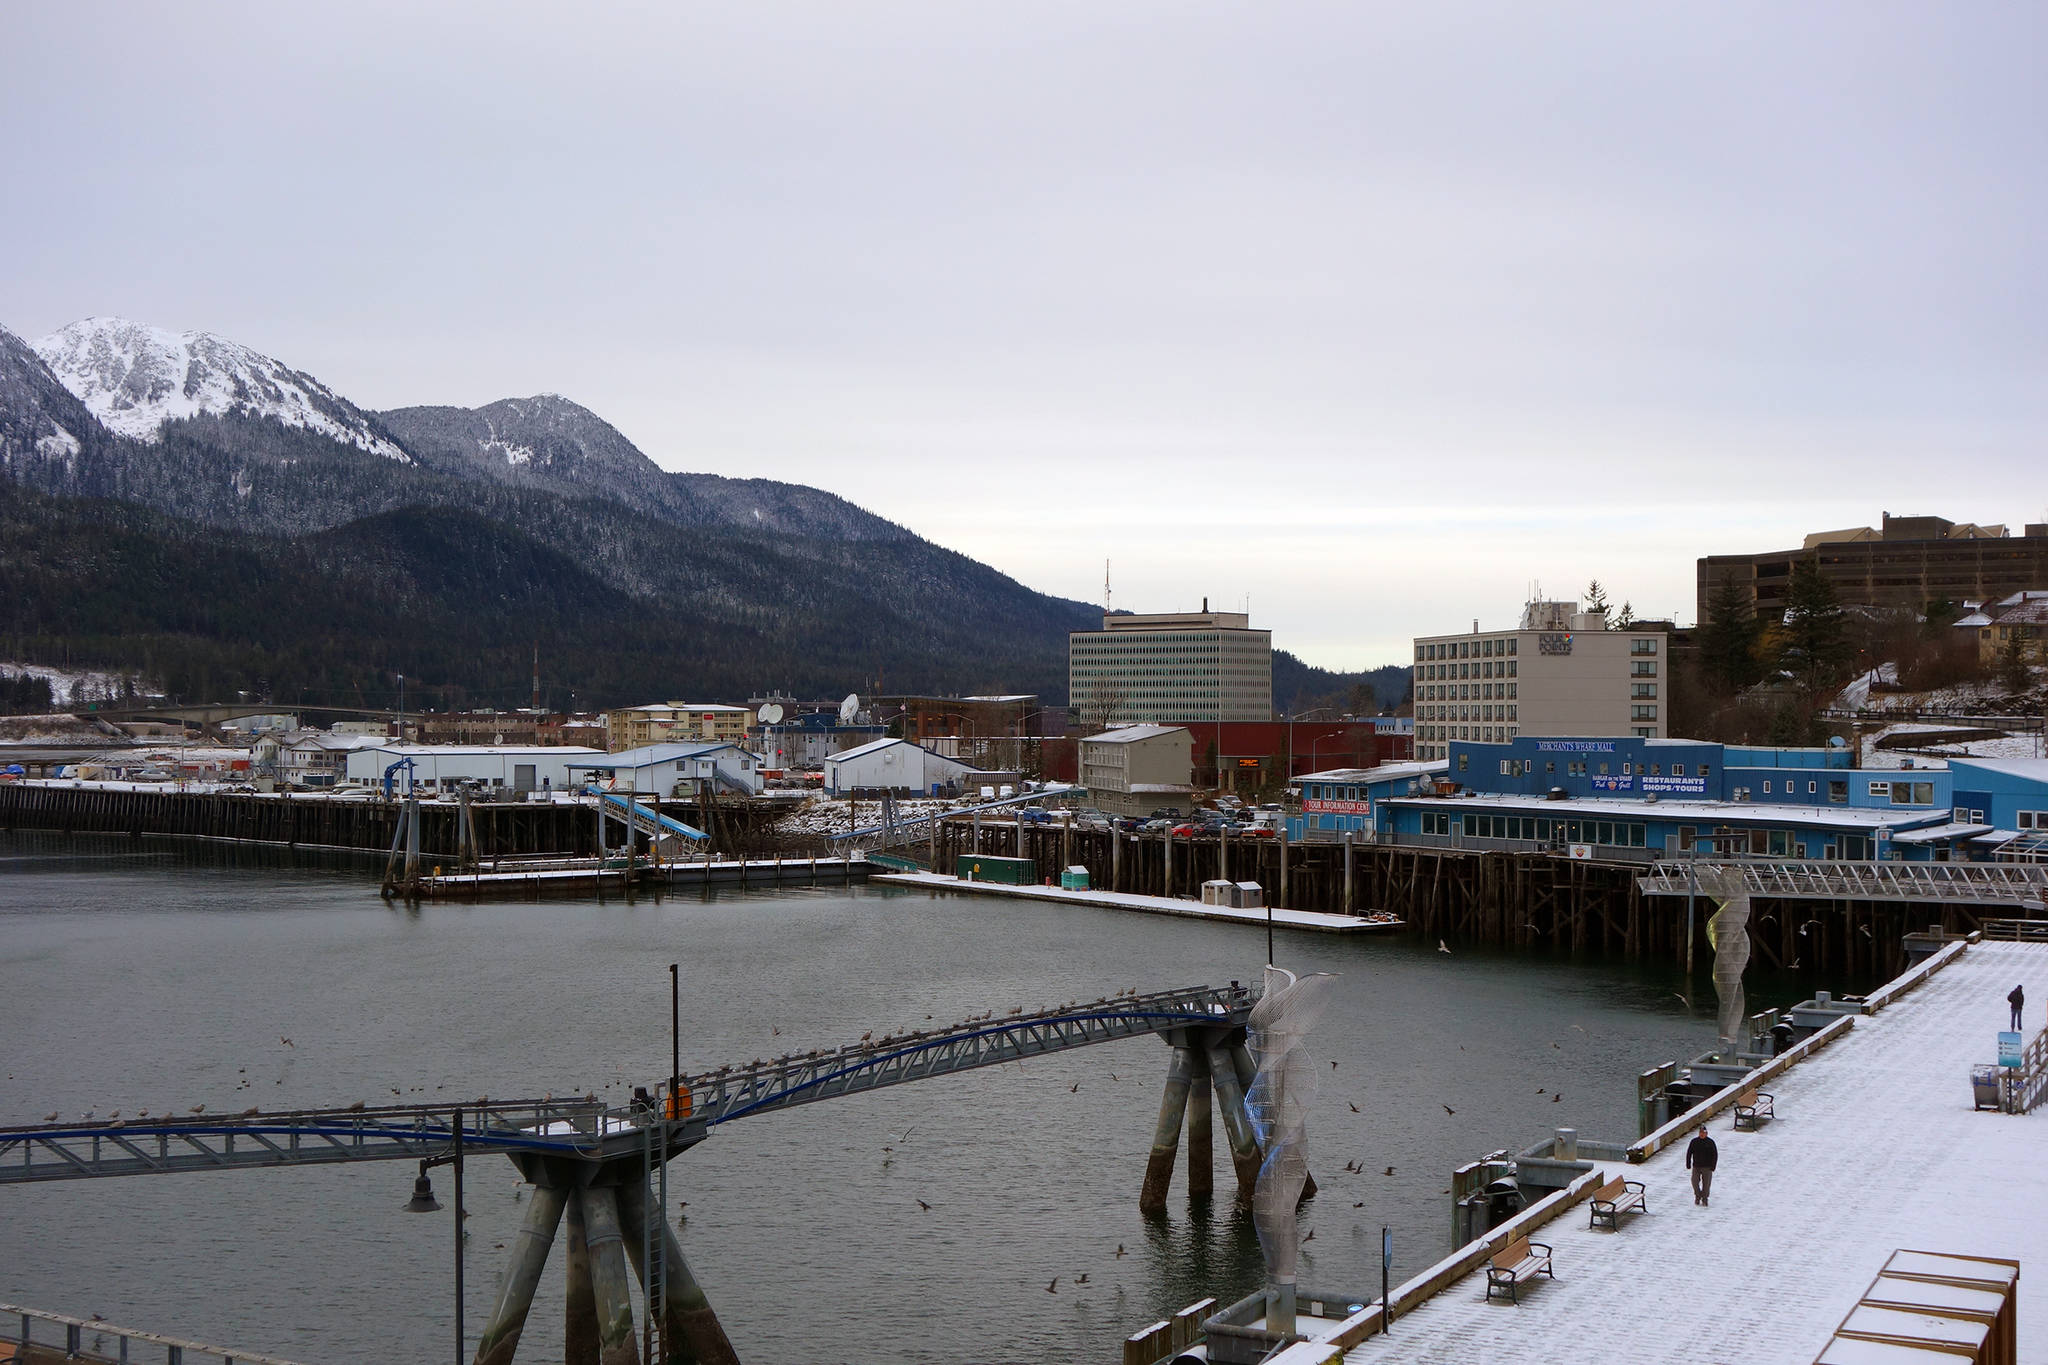 A recent sale of waterfront property to Norwegian Cruise Lines will likely have a ripple effect on the assessed value of waterfront property in Juneau. Alaska is a so-called “non-disclosure” state, so typically sales property transaction prices aren’t shared with the public, but bids for land previously owned by Alaska Mental Health Trust Authority were publicly unsealed in September. (Ben Hohenstatt | Juneau Empire)